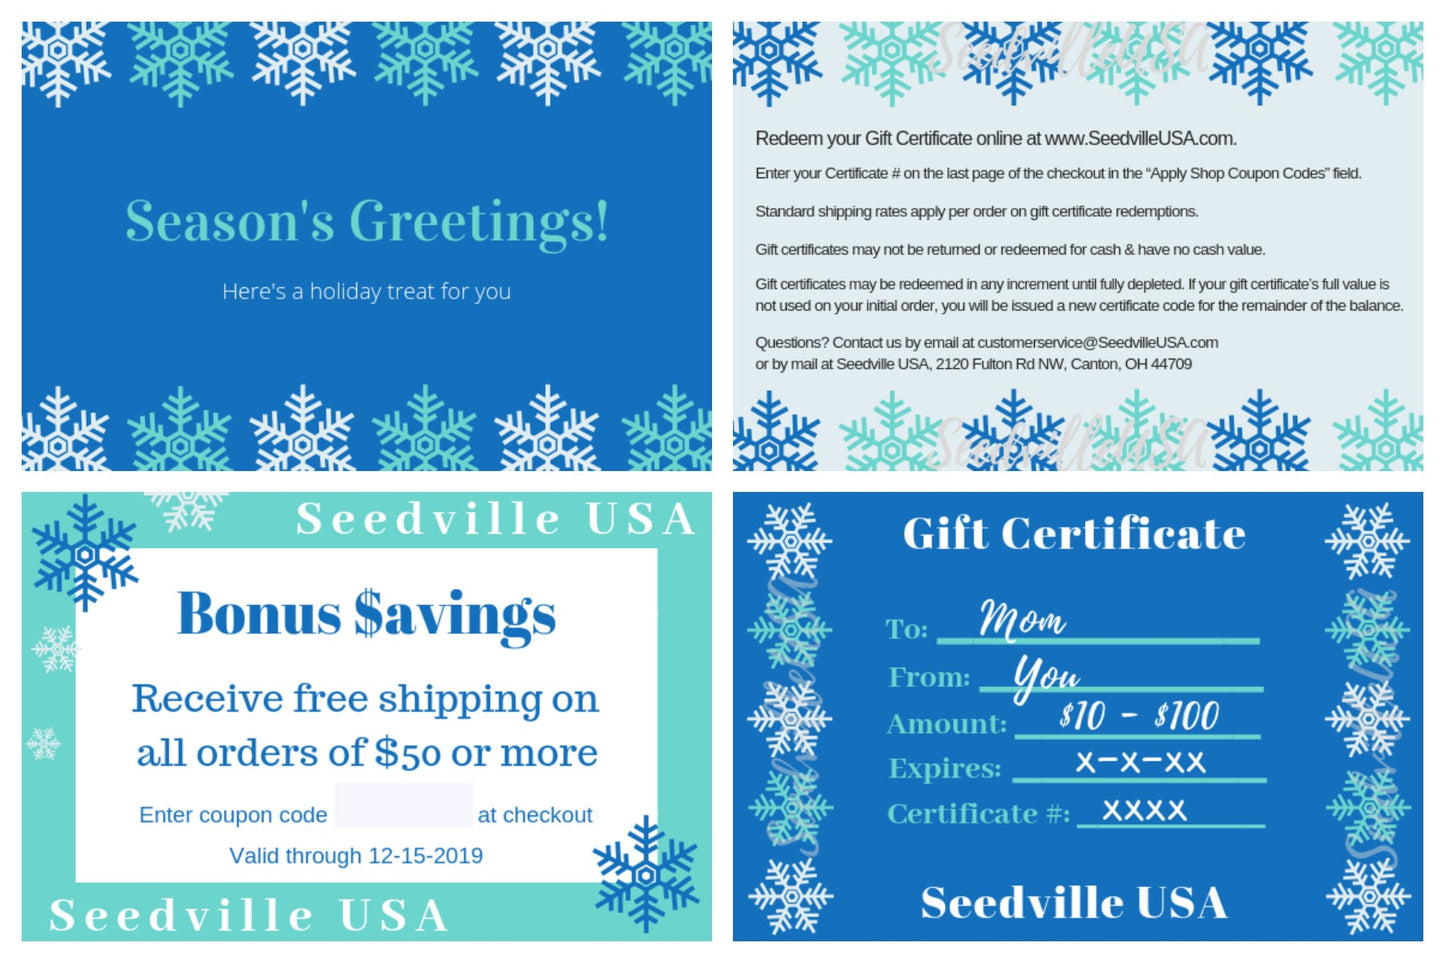 Seedville USA Shop Gift Certificate - Season's Greetings Hanukkah or Christmas Design - By Email or Postal Mail - You Choose Amount